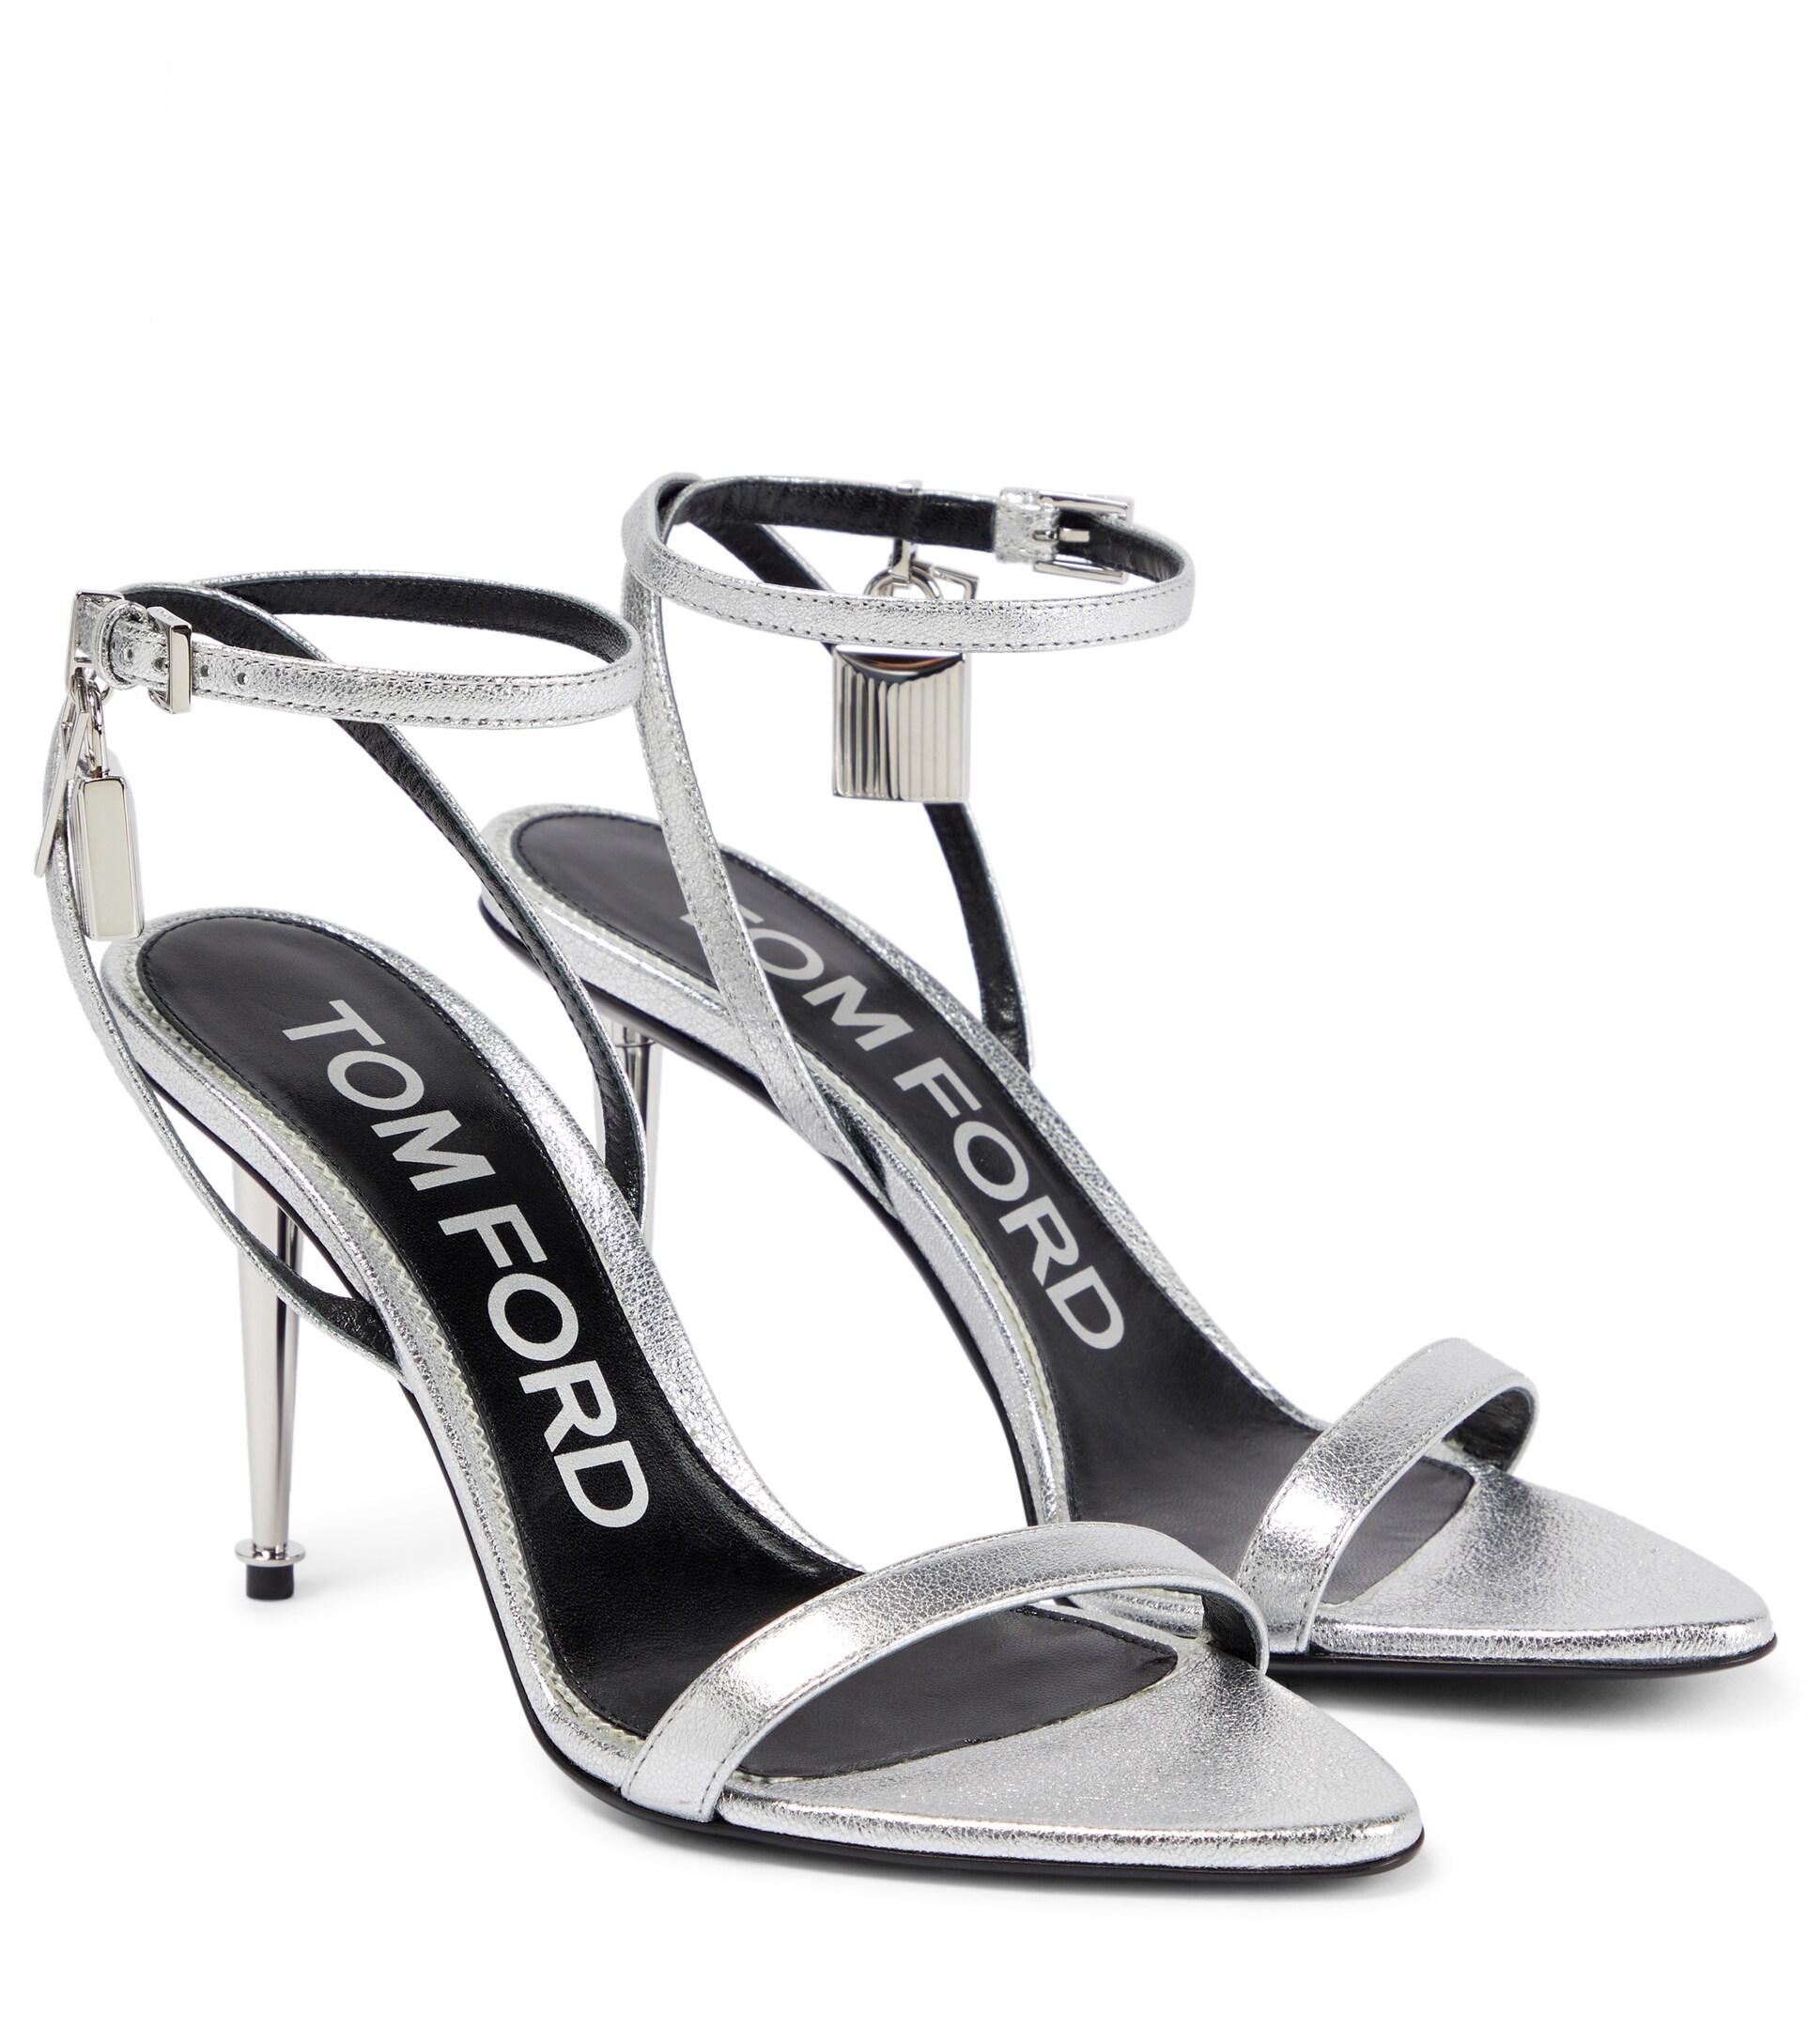 Tom Ford Padlock Leather Sandals in Metallic | Lyst